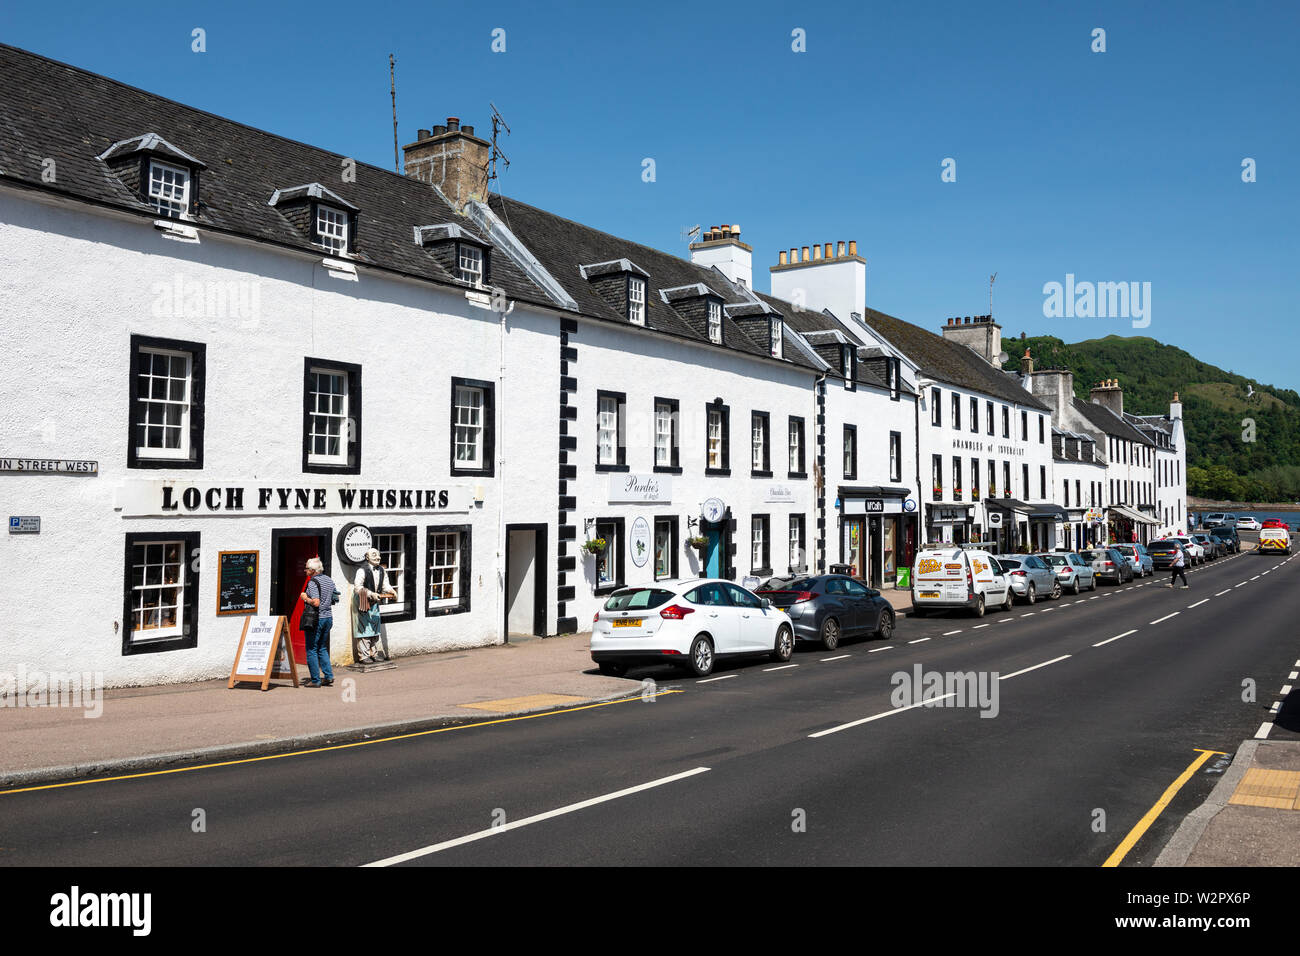 Loch Fyne Whiskies and other shops, hotels and restaurants along Main Street in Inveraray, Argyll and Bute, Scotland, UK Stock Photo